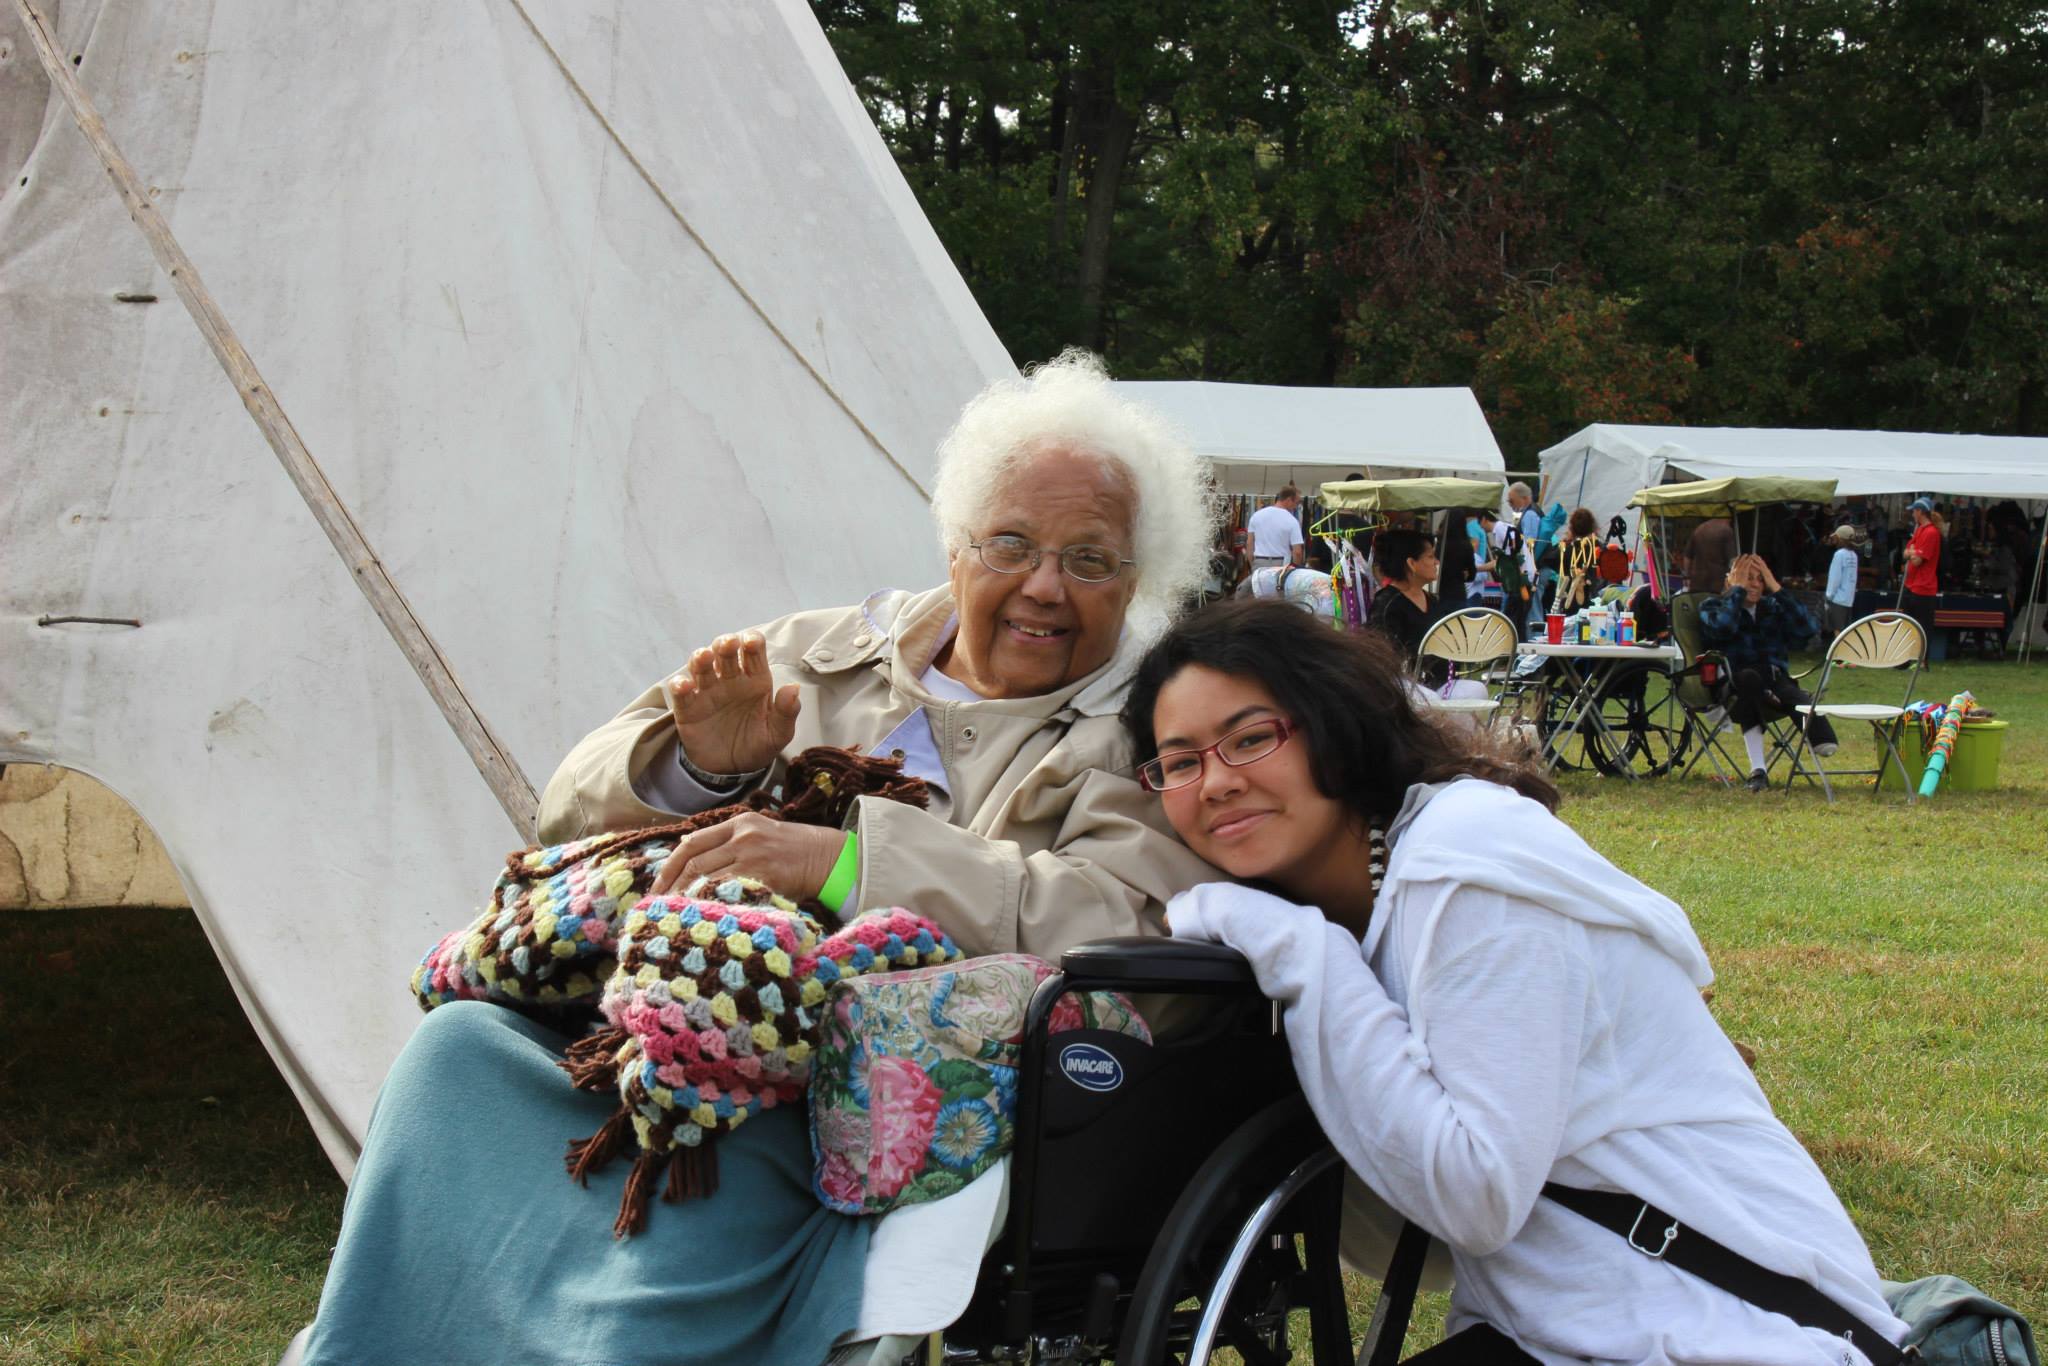 Grandma and I at a local powwow, she always wished to further reconnect with out indigenous roots